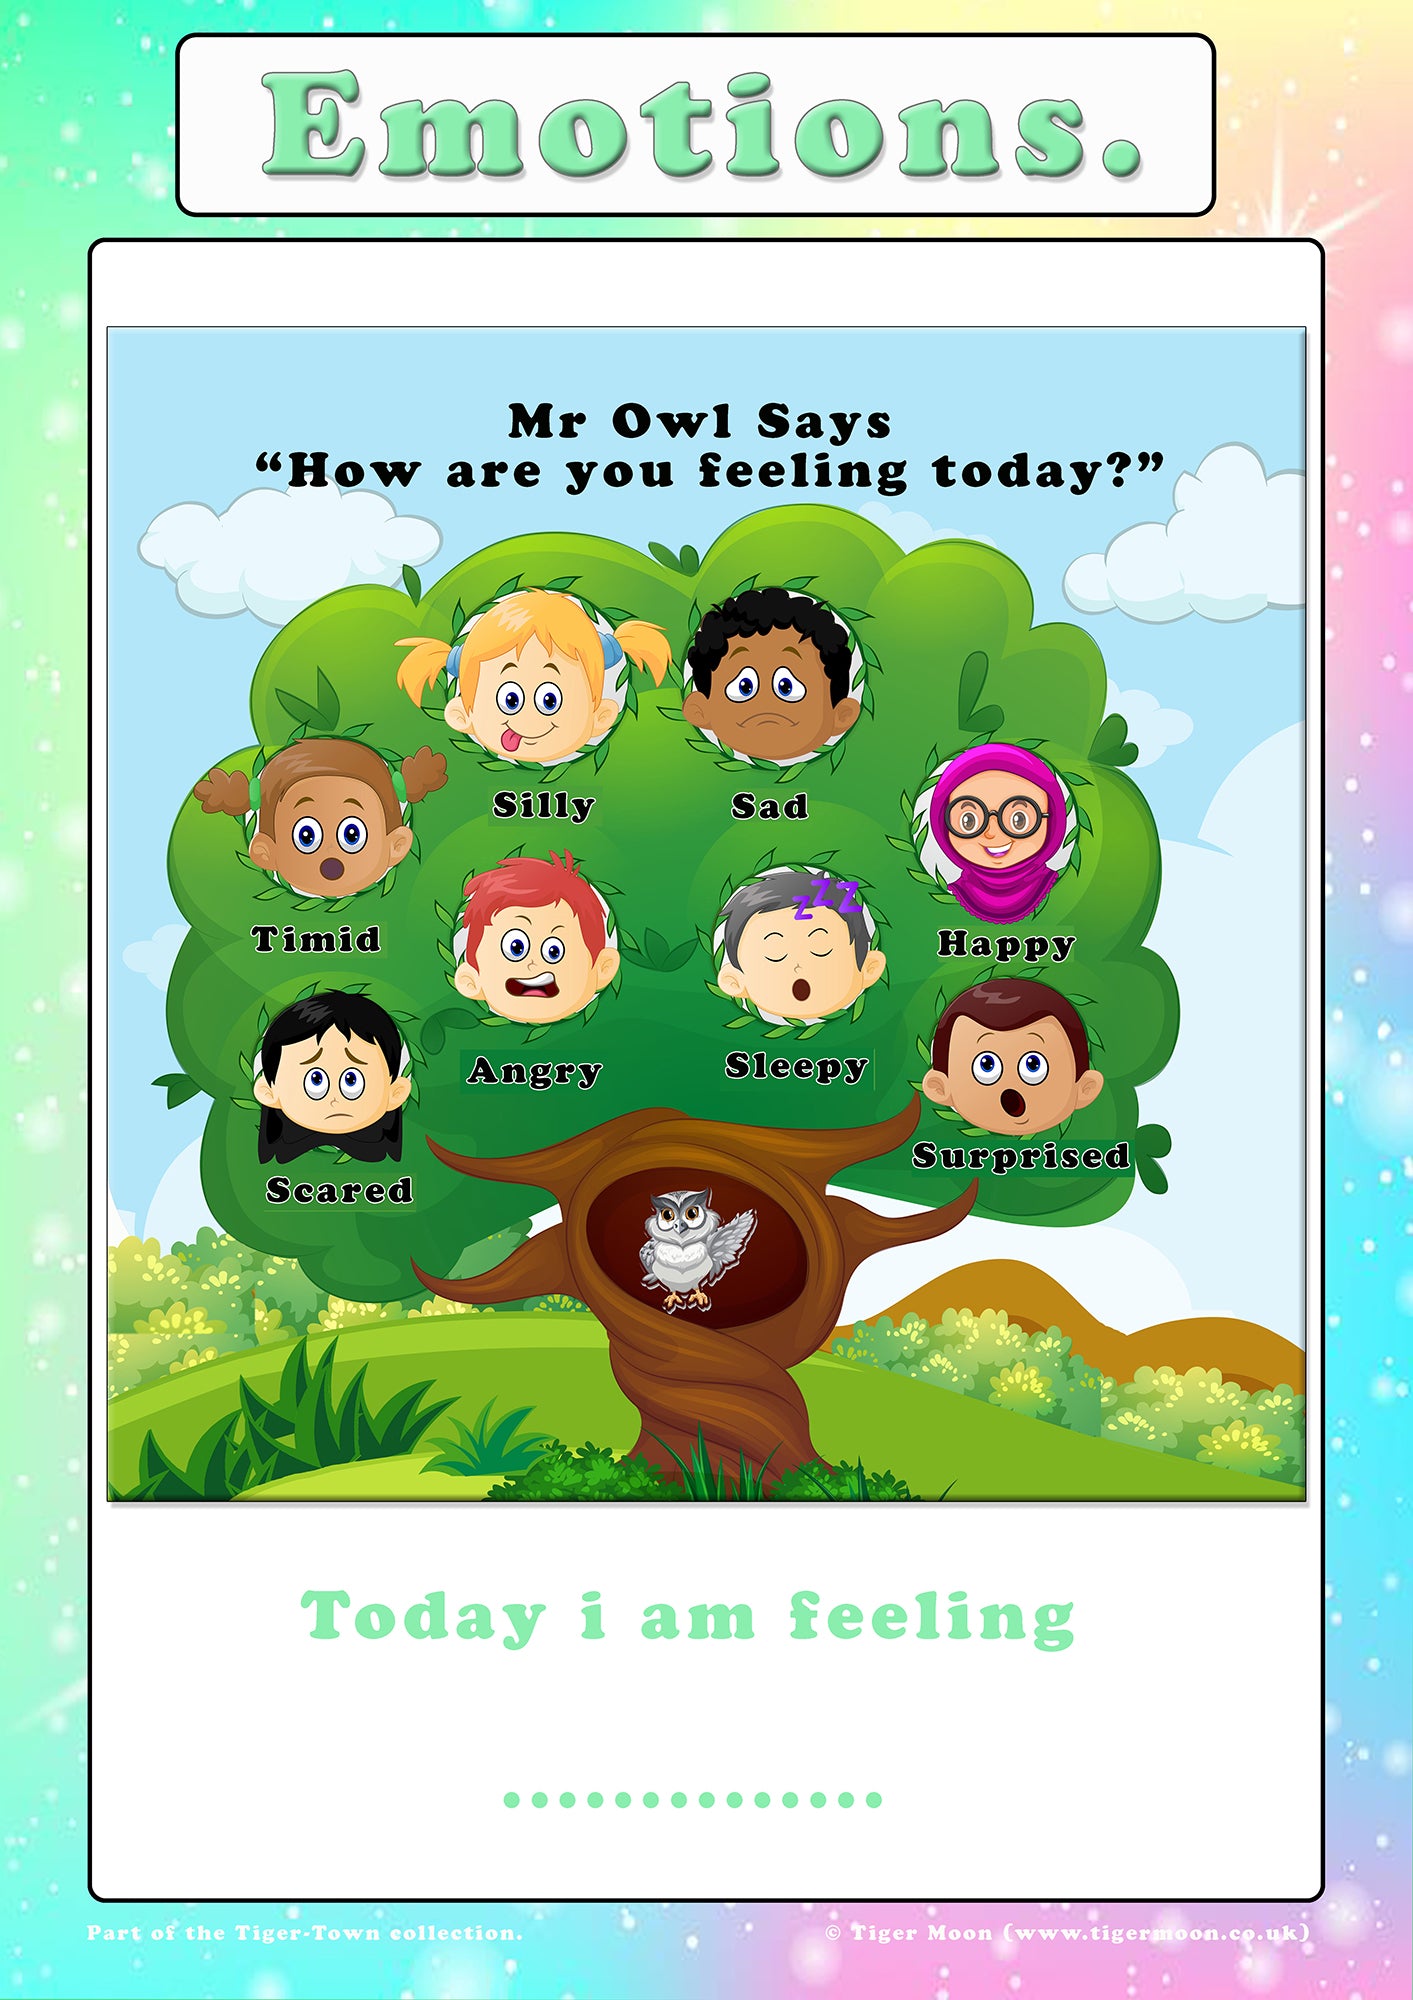 Pack of 6 children's educational posters